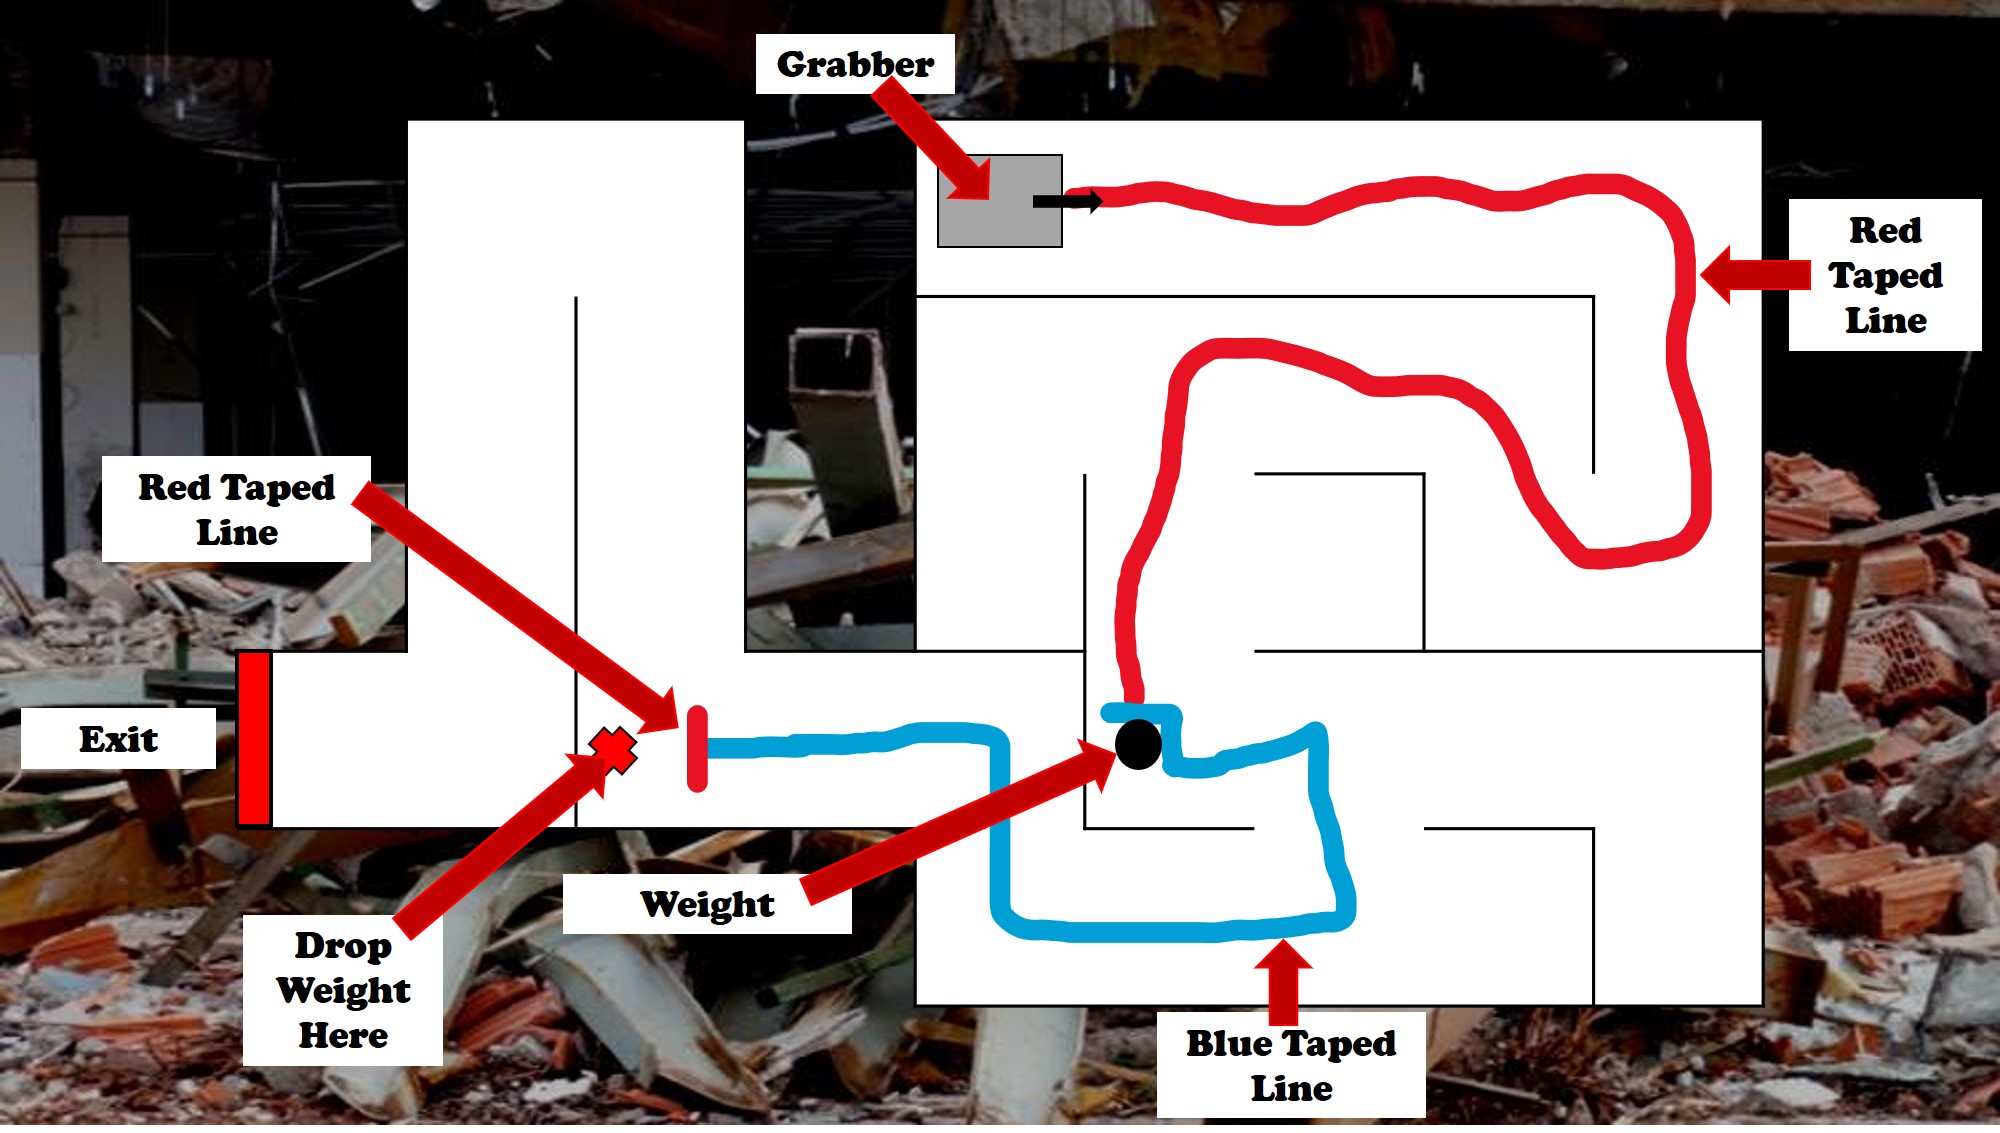 The Grabber unit starts in a different position within the maze. Needs to find and collect the weight, the route is marked out with a red line. Then it needs to follow a blue line out of the maze. When it reaches the red line end point it needs to drop the weight before negotiating a corridor of right-angled turns in both directions to the exit.